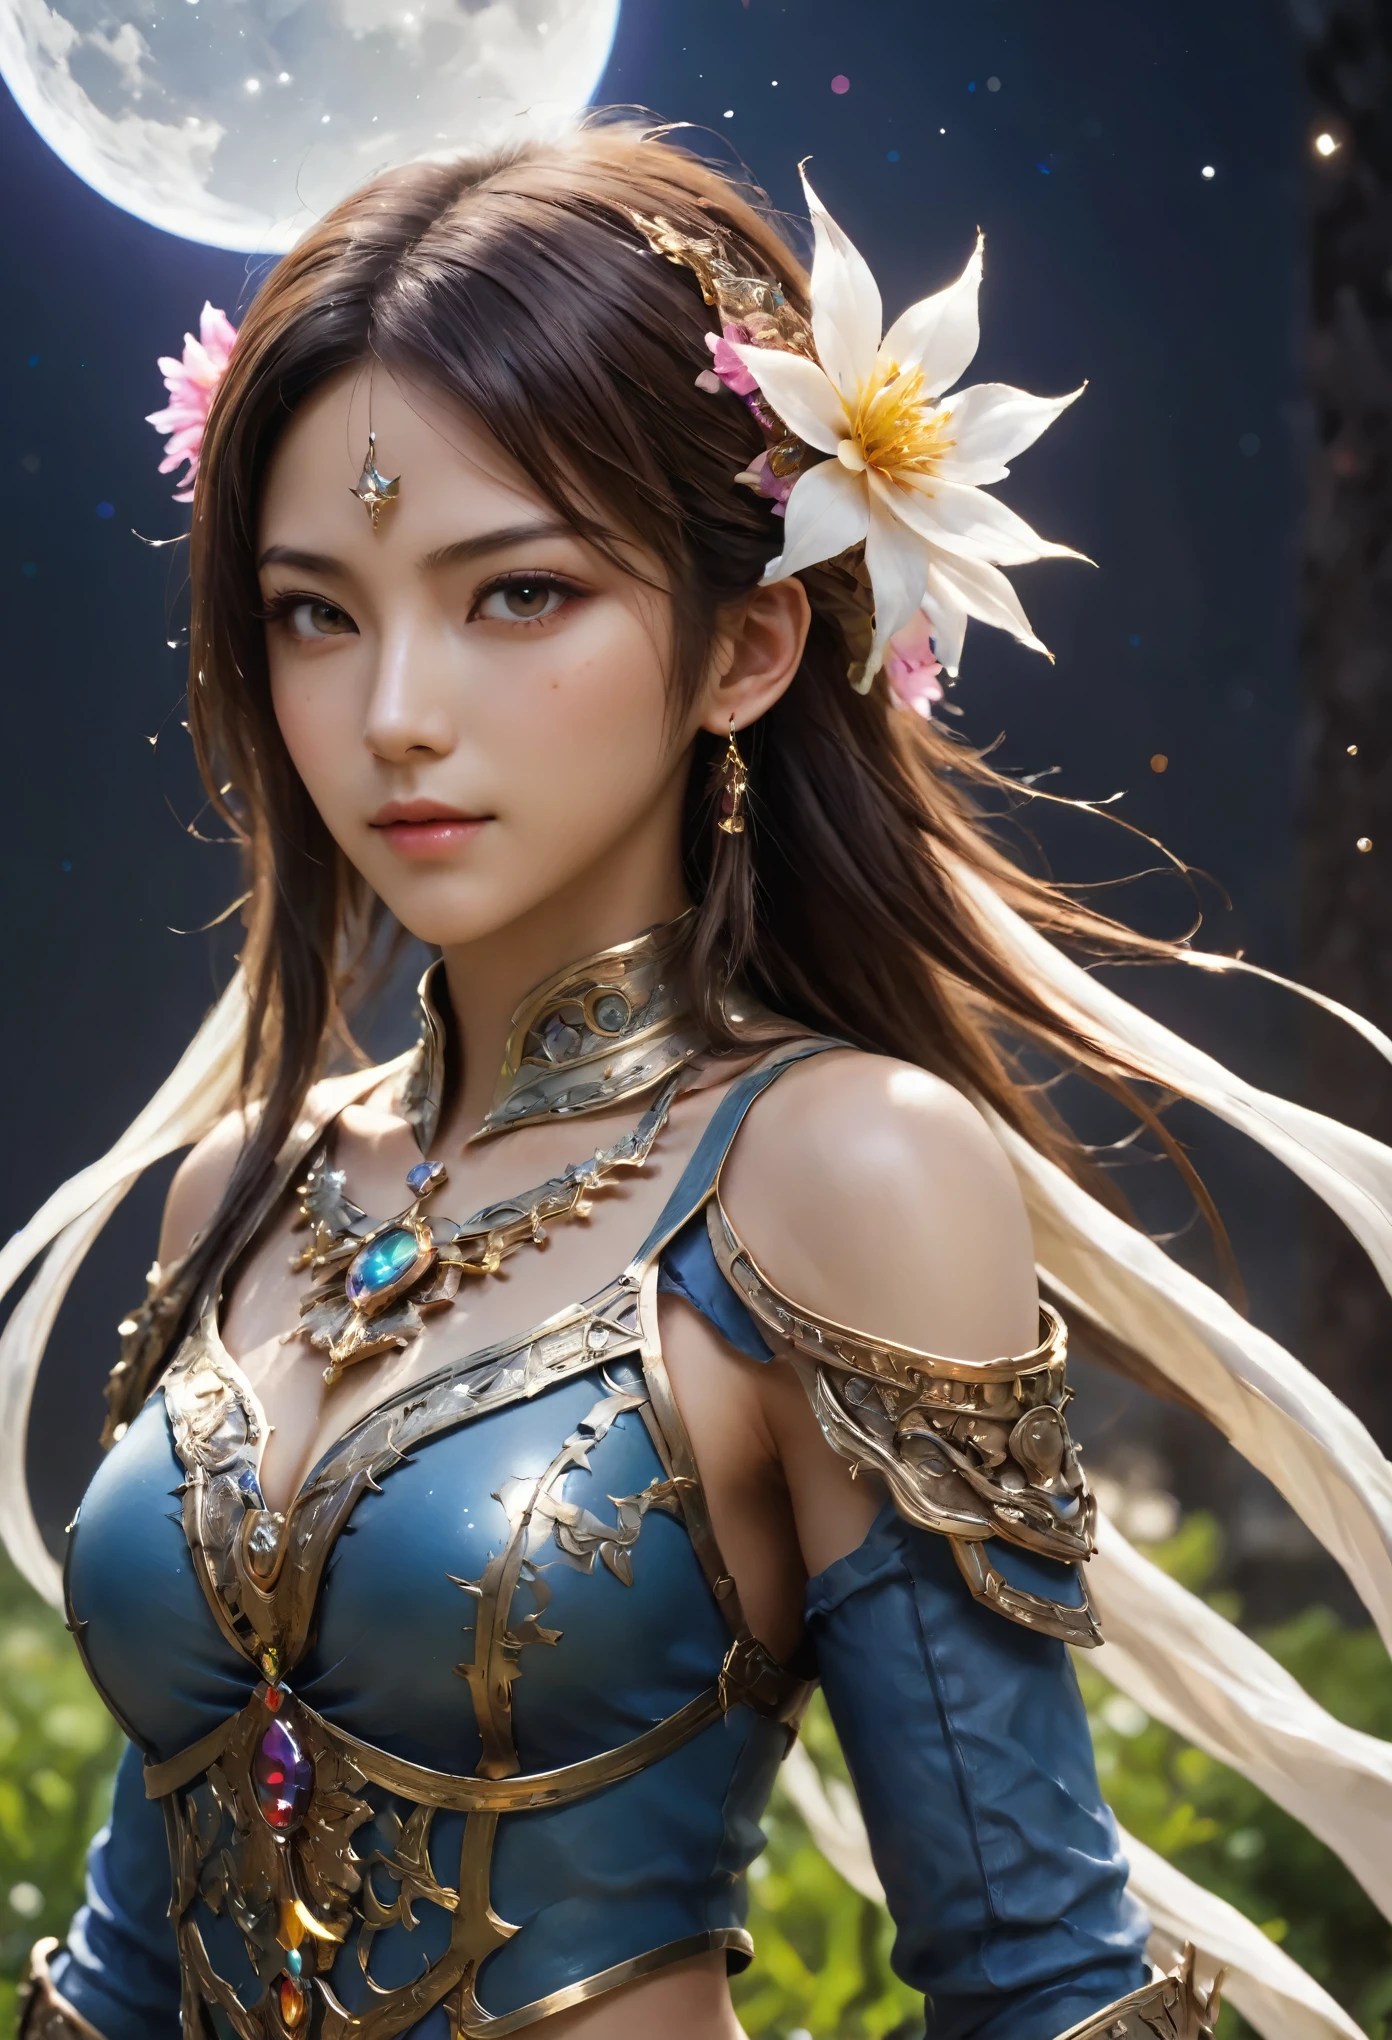 8K resolution, masterpiece, Highest quality, Award-winning works, unrealistic, final fantasy, Royal Jewel,Photorealistic Painting by Midjourney and Greg Rutkowski, , elegant, Very detailed, Delicate depiction of hair, miniature painting, Digital Painting, Art Station, Concept Art, Smooth, Sharp focus, shape, nature, Clear shadows, Asura, God of War, Castle in the Sky, A strip of light pouring down from the sky, A pillar of light stretching to the sky, Complex colors, Buddhist Mandala, Colorful magic circle, flash, Mysterious Background, Aura, A gentle gaze, BREAK, Small faint lights and flying fireflies, night, Starry Sky, milky way, nebula, shooting star, Flowers, birds, wind and moon,erotic, sole sexy lady, healthy shaped body, Anatomically accurate skeleton, 22 years old lady, Asura, 170cm tall, huge firm bouncing busts, Holy sword in both hands, Complicated armor, Brightly colored armor